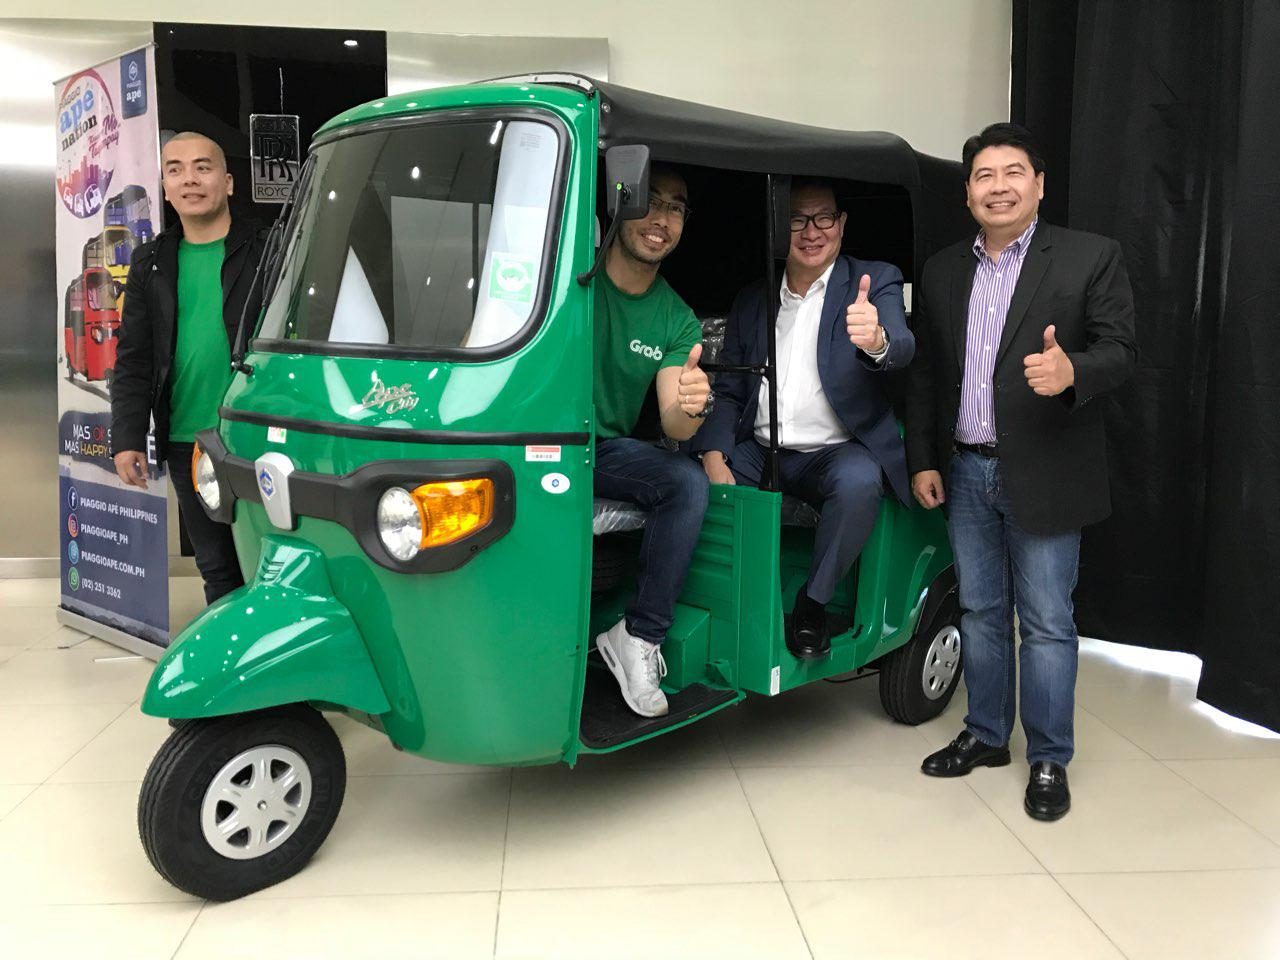 LOOK: Grab launches premium tricycle service